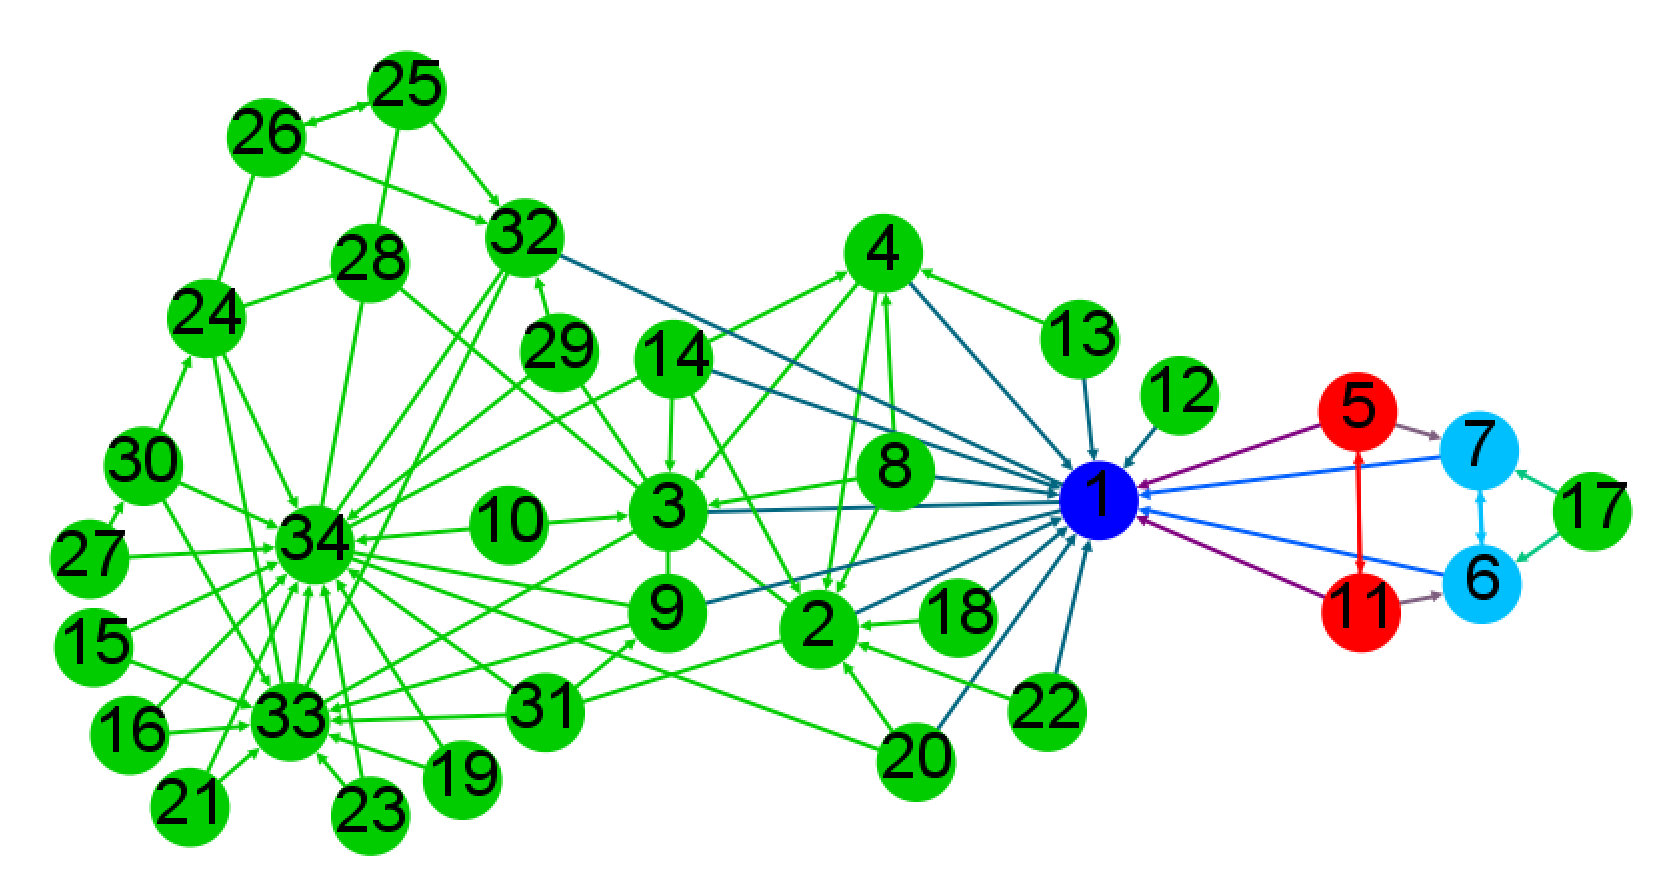 Zone generated by nodes 5 or 11